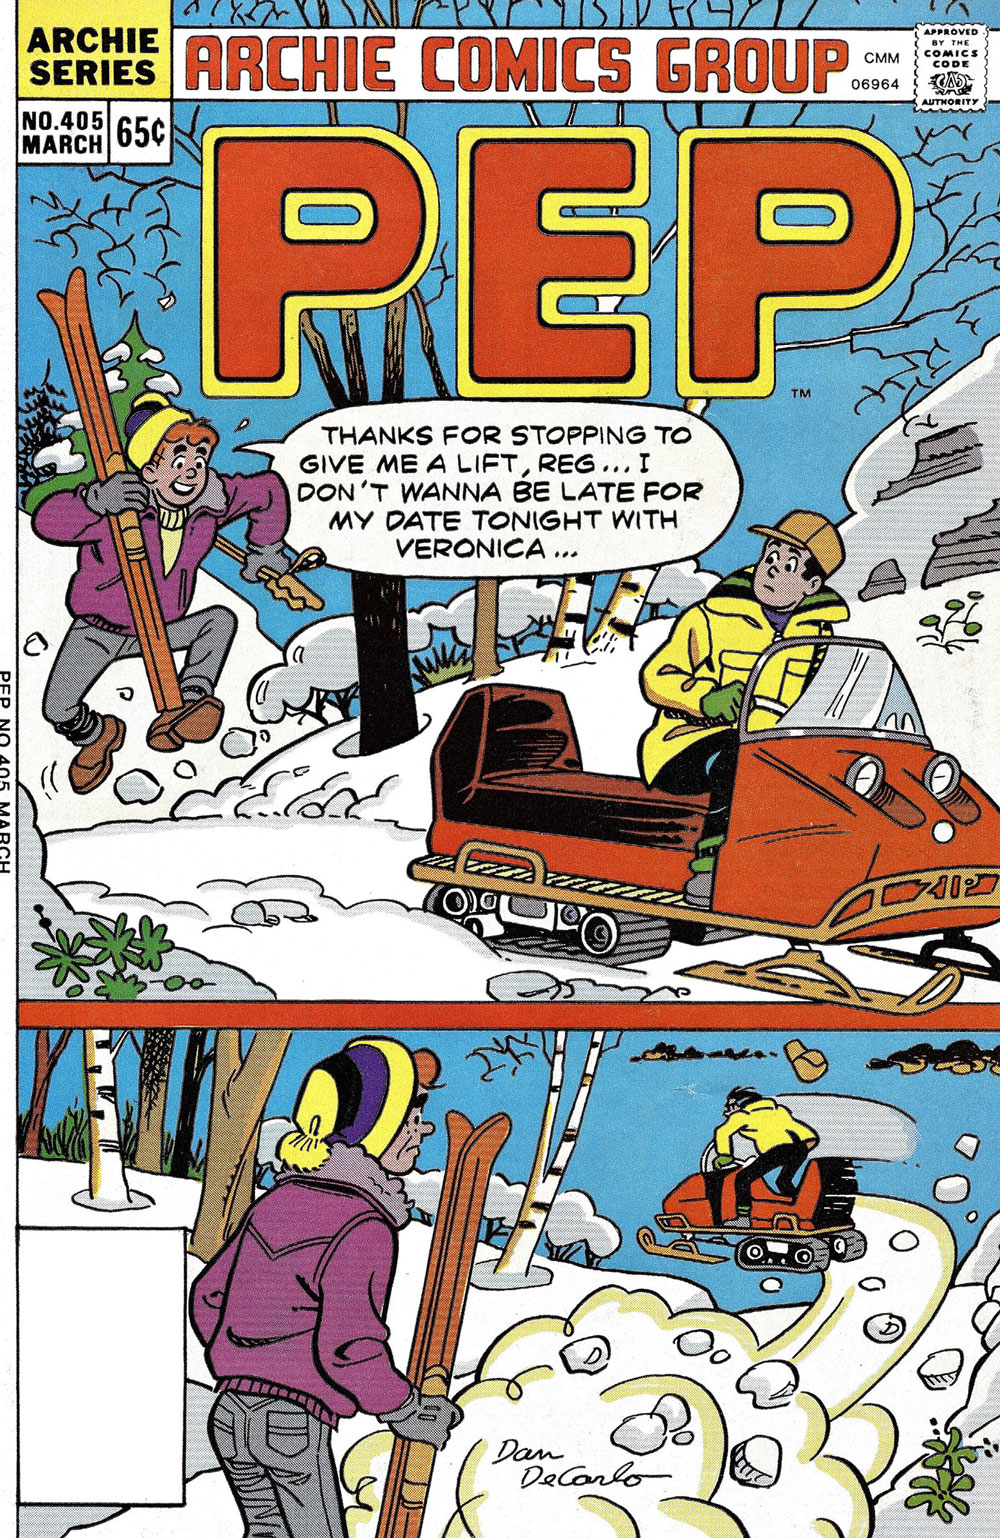 Cover of PEP #405. Reggie drives a snow mobile and Archie runs after him holding skis, saying thanks for giving him a lift because he doesn't want to be late for his date with Veronica. As soon as he hears this, in the next panel, Reggie speeds off without Archie.